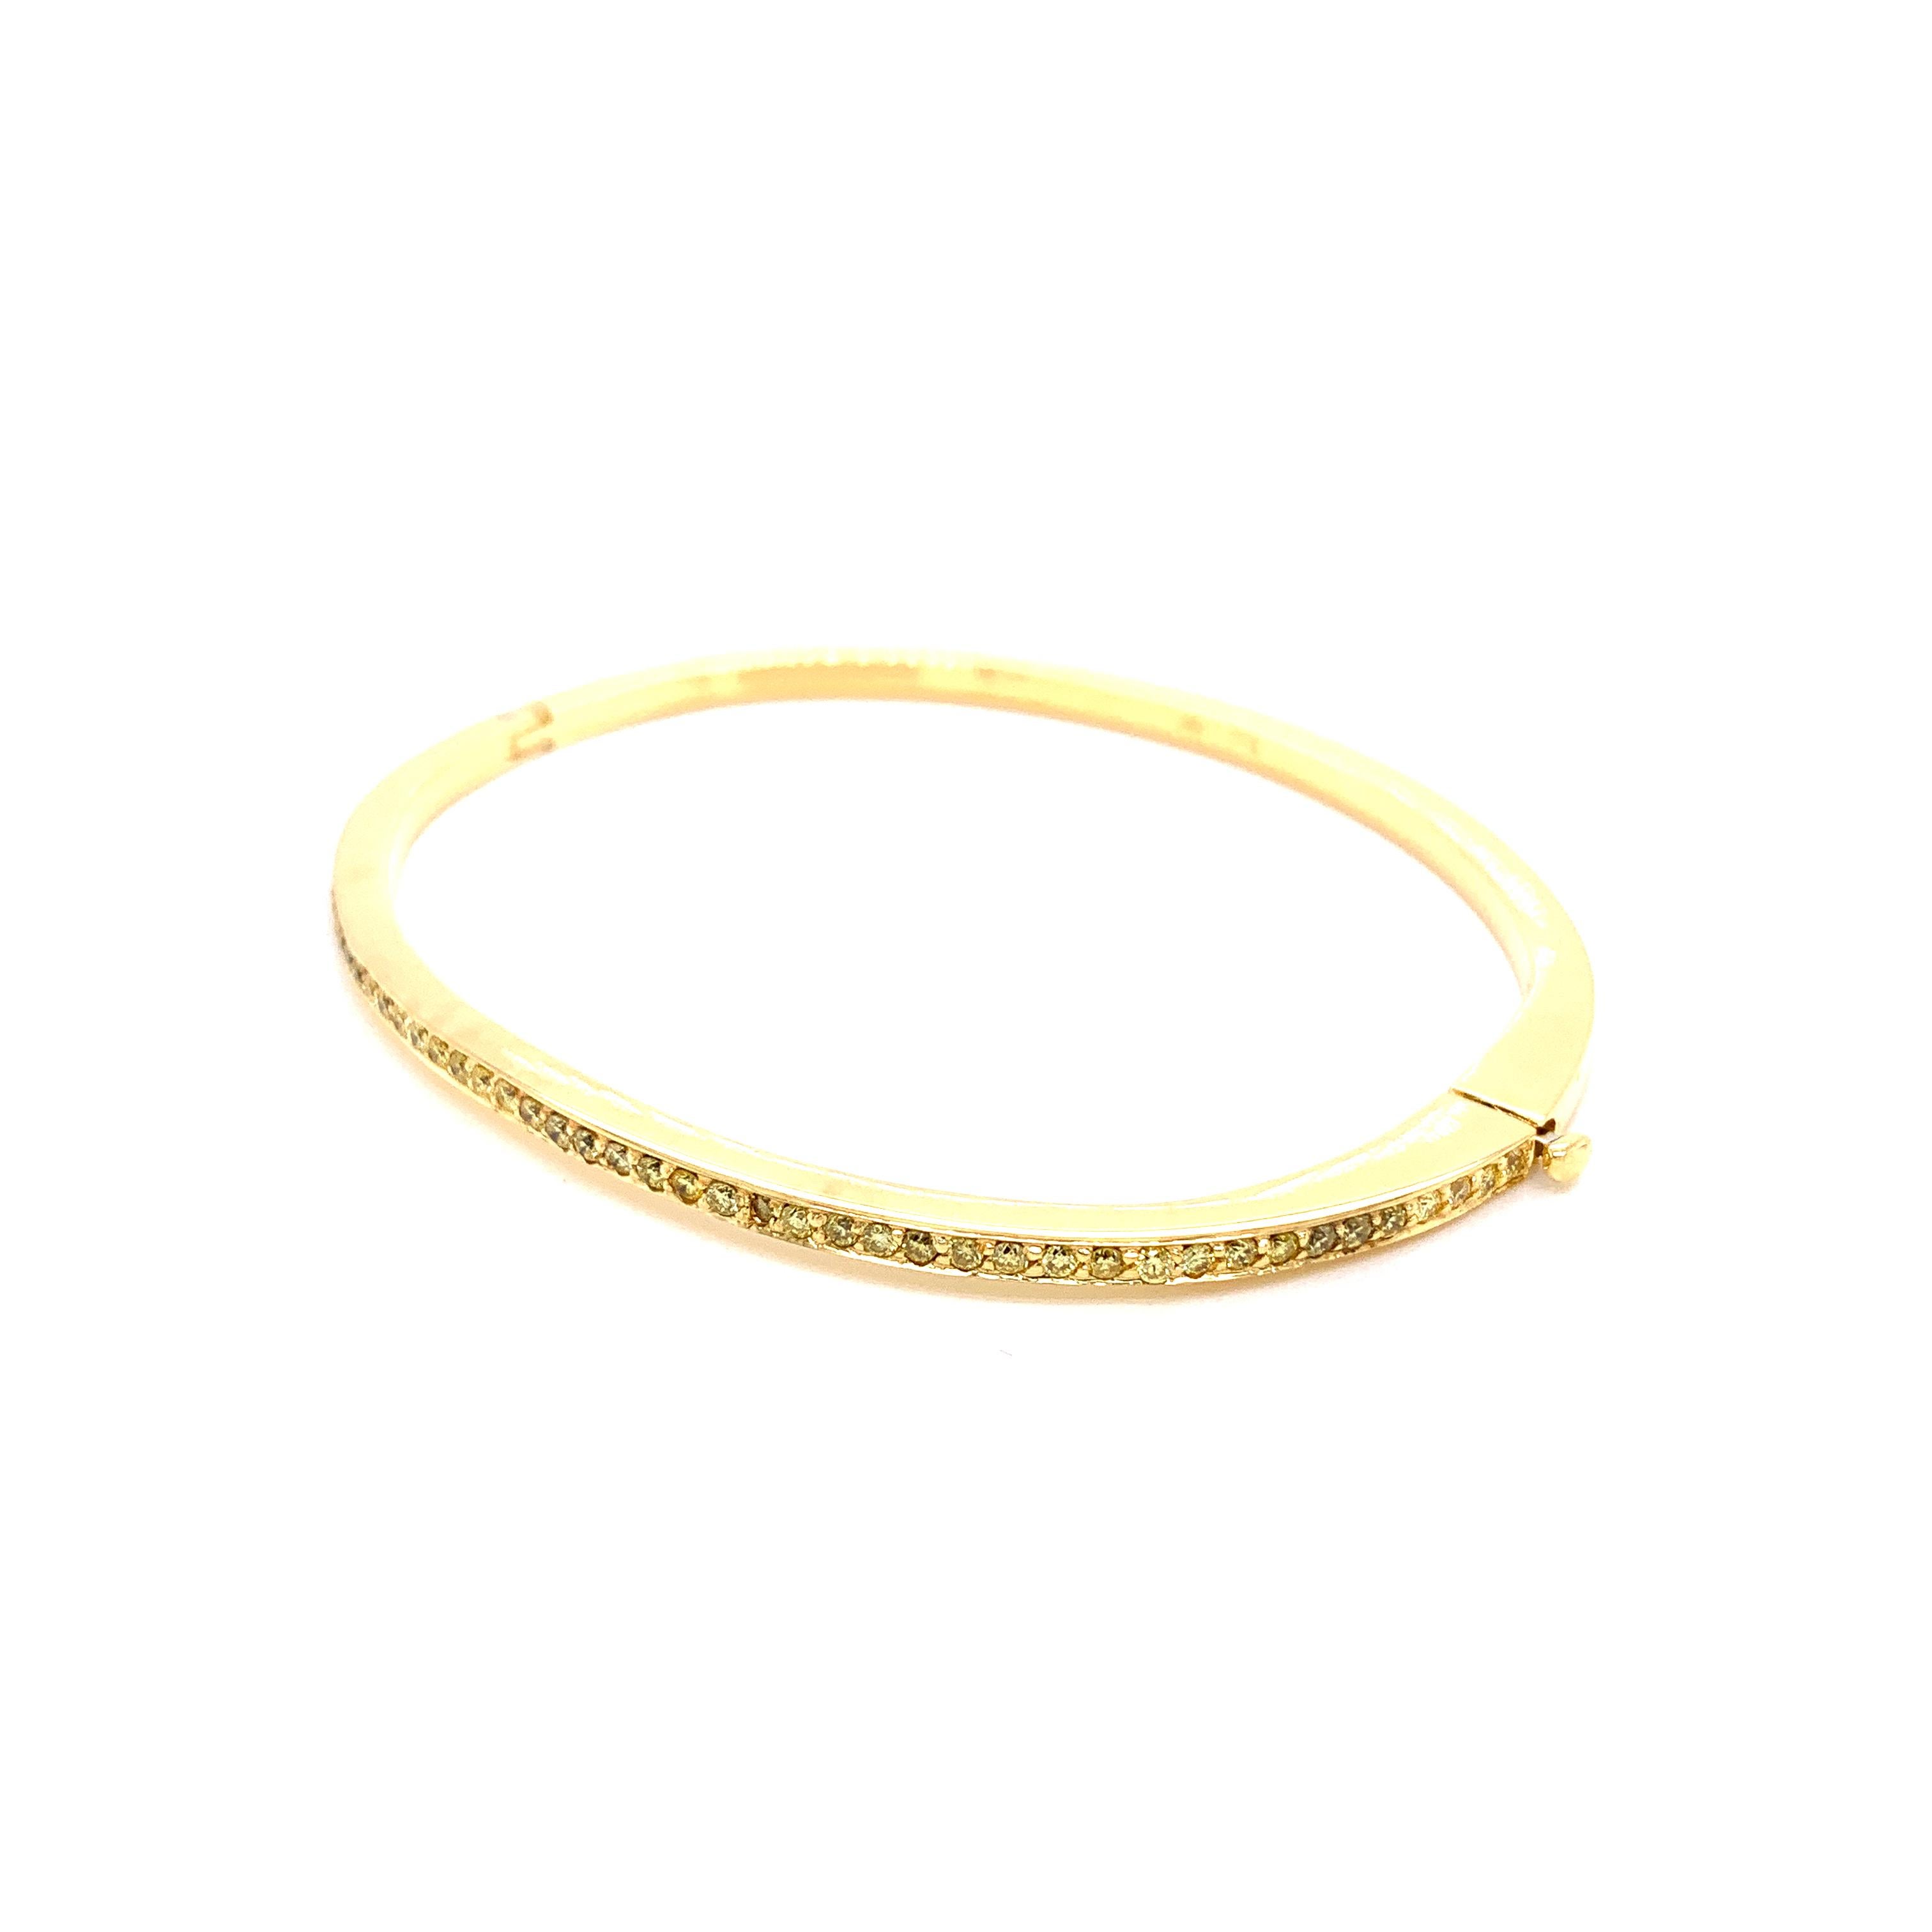 Intense Yellow Round Diamonds and 18K Yellow Gold Bangle:

An elegant bangle, it features beautiful intense yellow round brilliant diamonds weighing 0.80 carat. The diamonds are of fine quality and clarity, with good brilliance and lustre. The